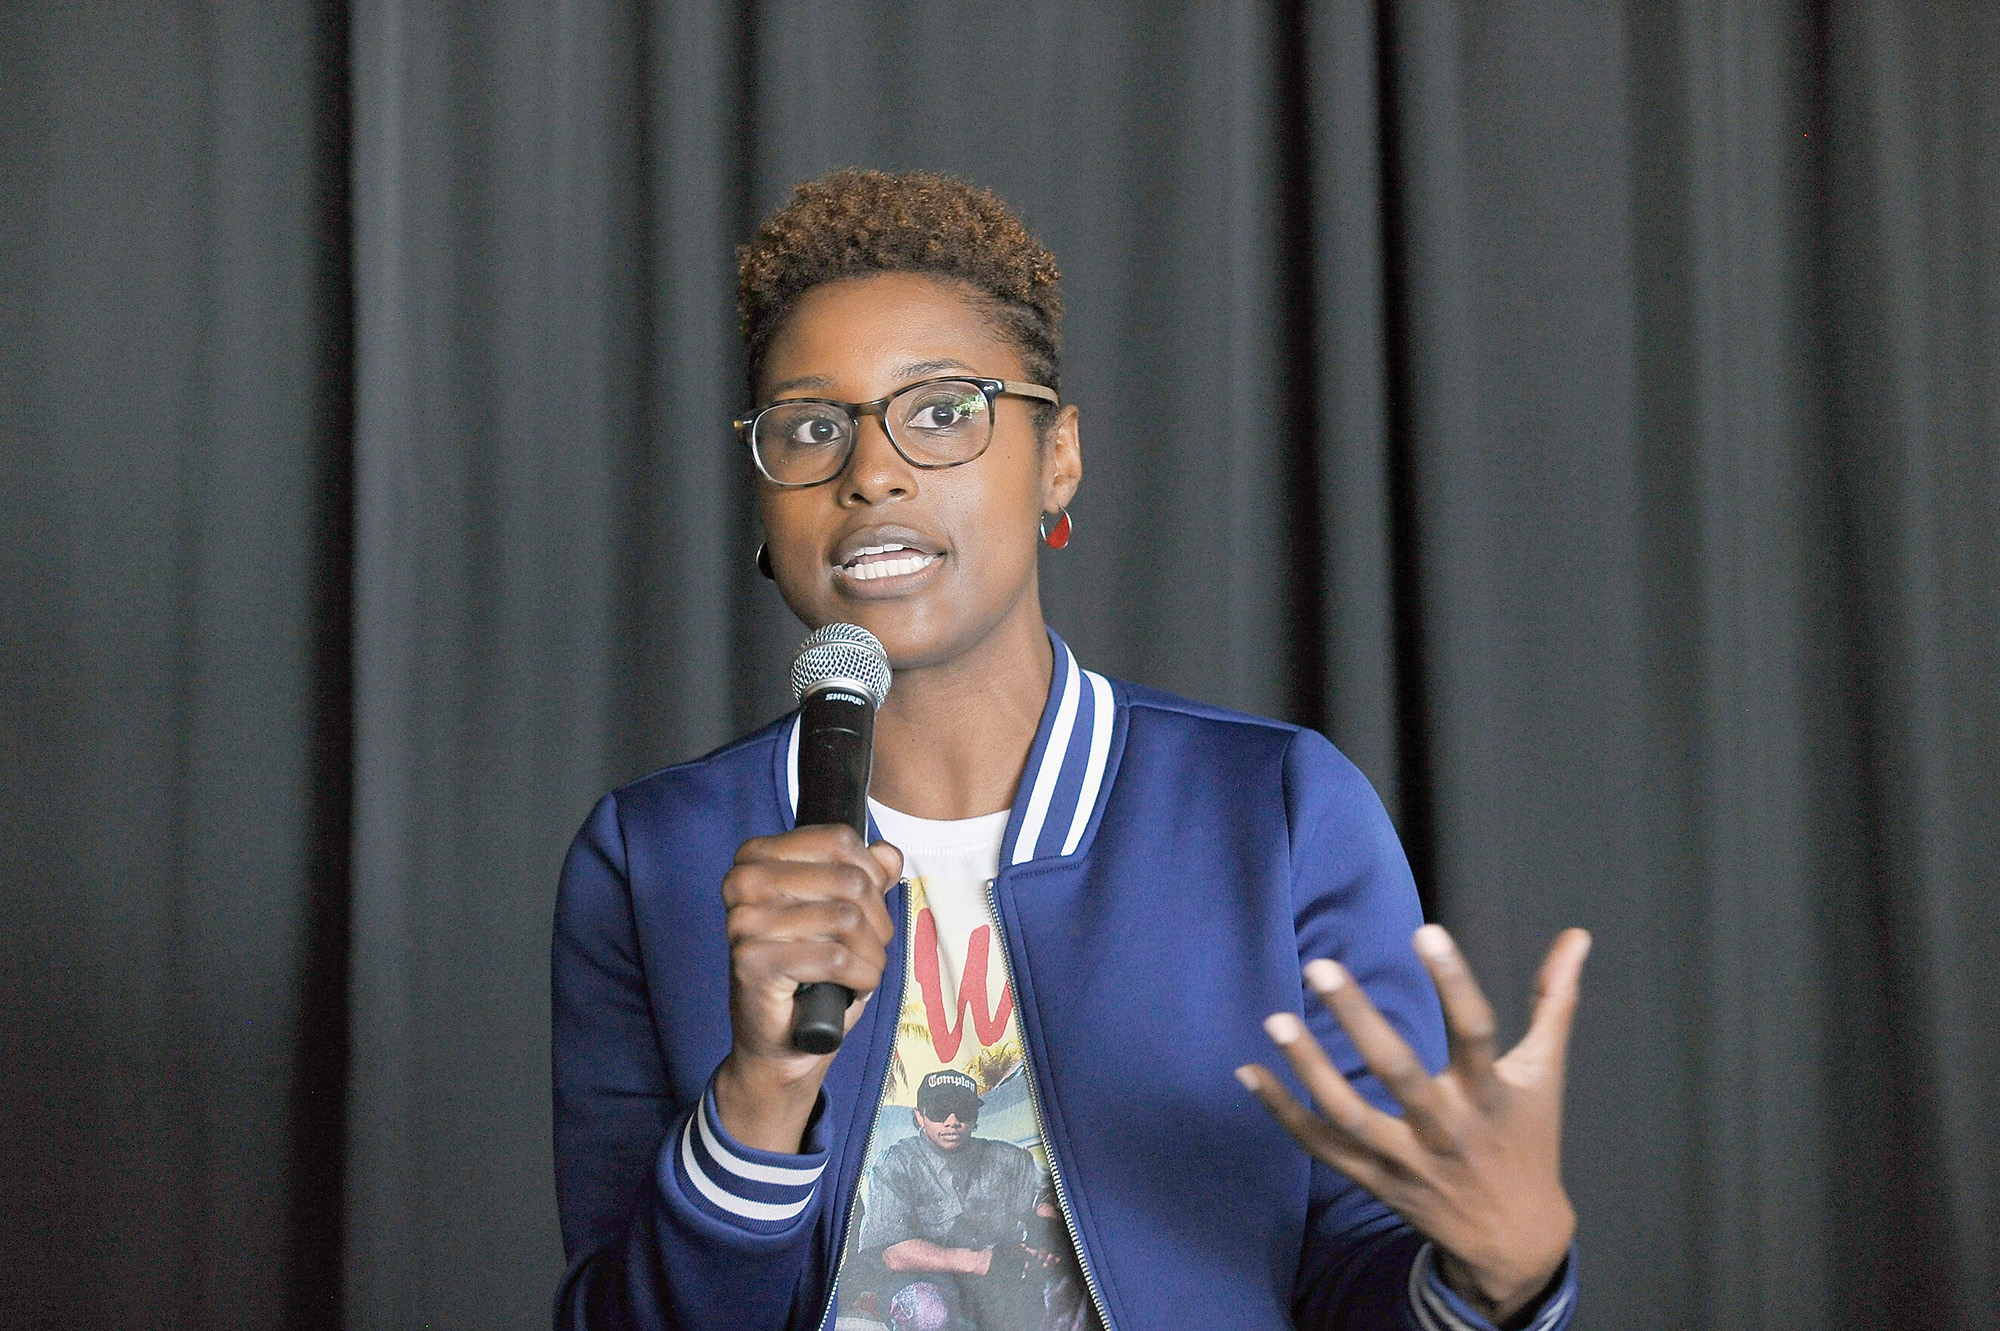 Issa Rae speaks onstage at the Diversity Speaks Panel during the 2016 Los Angeles Film Festival on June 4, 2016 in Culver City, California.  (Photo by Jerod Harris/WireImage) (Jerod Harris—WireImage)